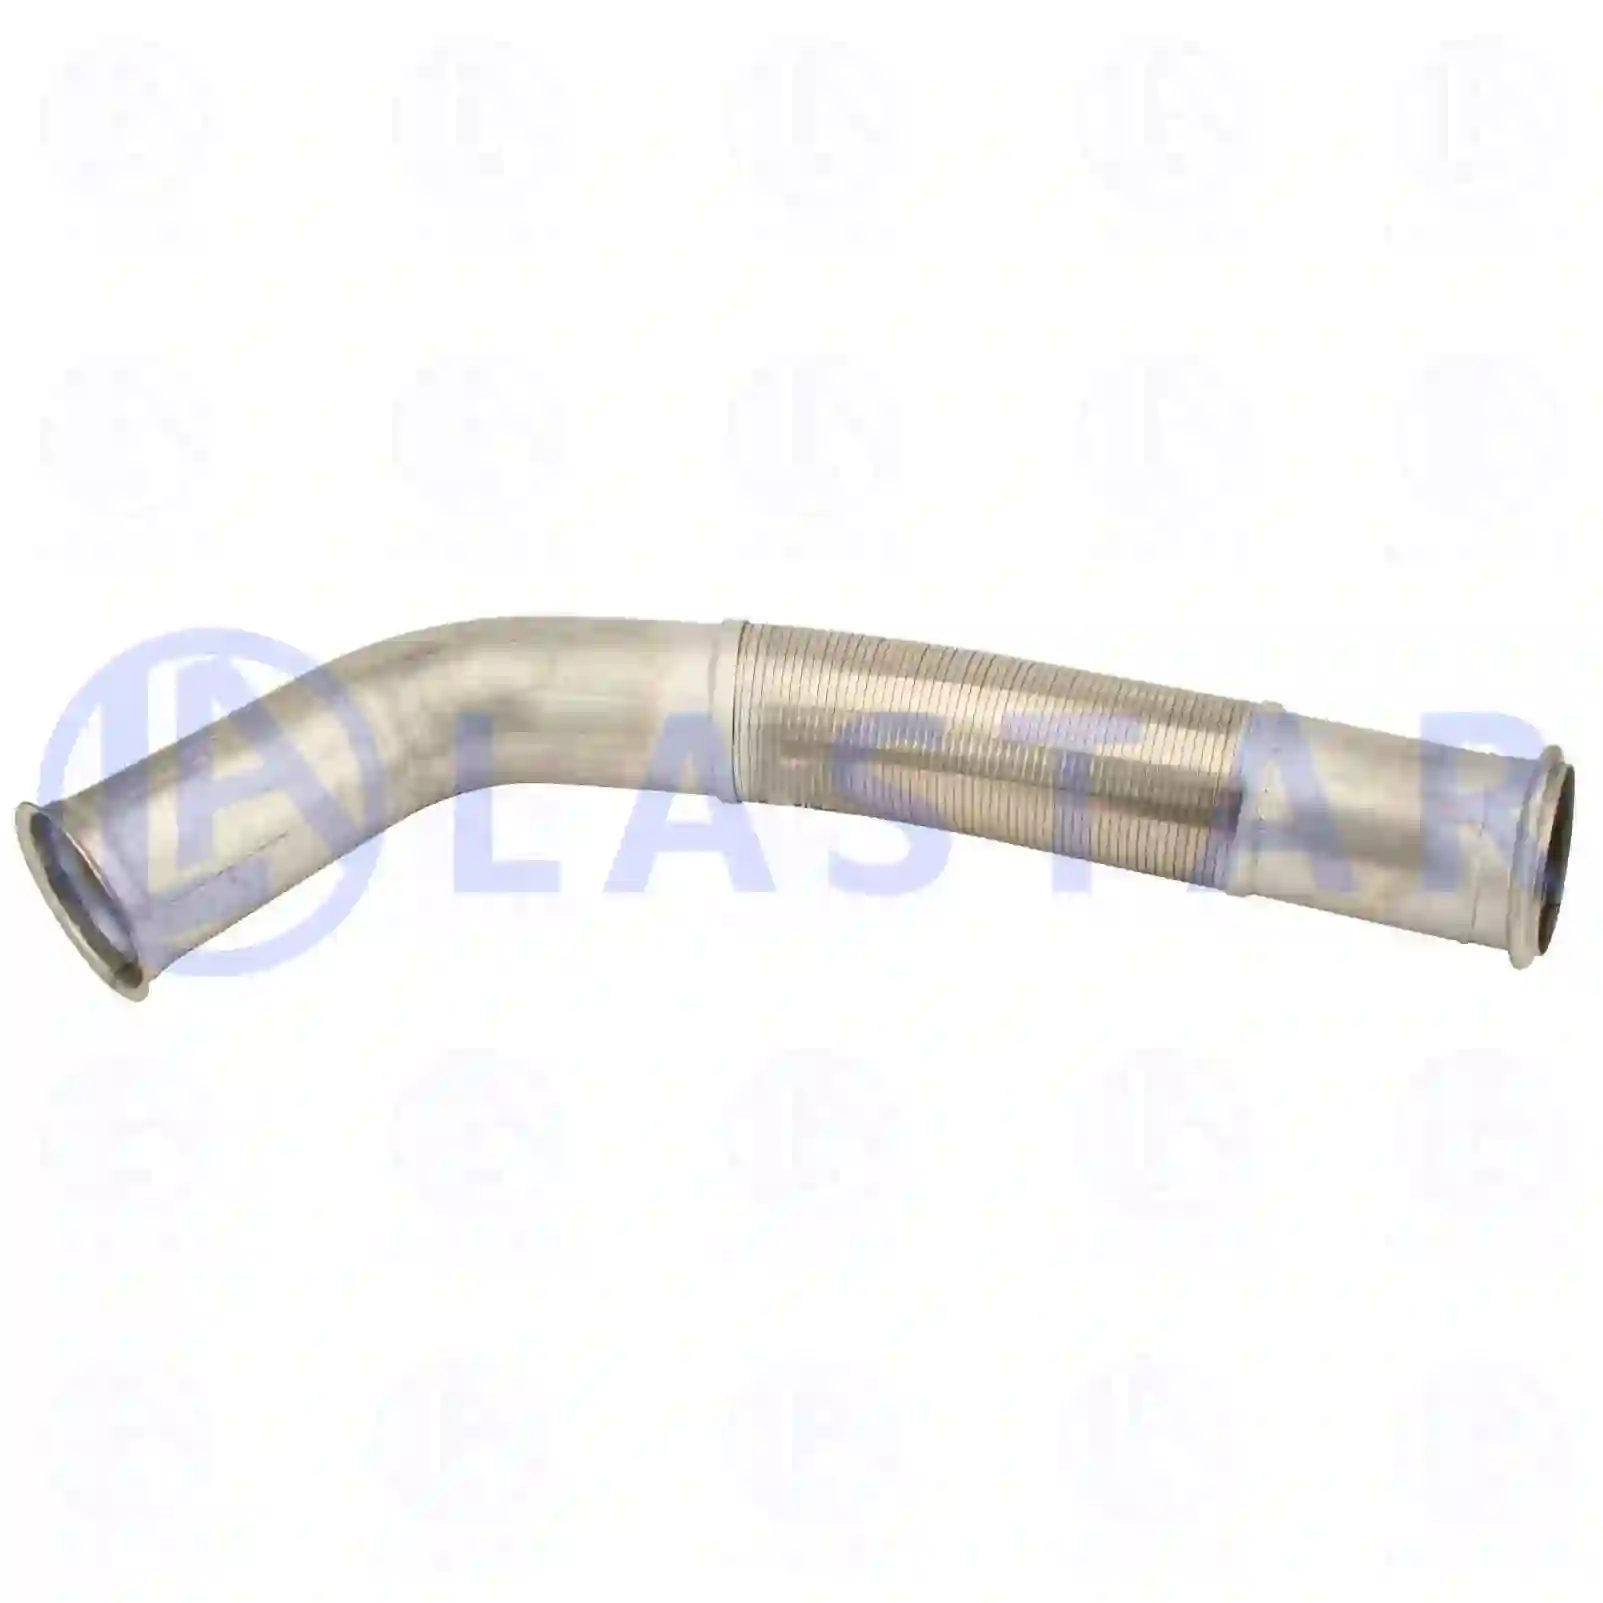 Front exhaust pipe, 77706259, 1381559, 1428369, 1629456 ||  77706259 Lastar Spare Part | Truck Spare Parts, Auotomotive Spare Parts Front exhaust pipe, 77706259, 1381559, 1428369, 1629456 ||  77706259 Lastar Spare Part | Truck Spare Parts, Auotomotive Spare Parts